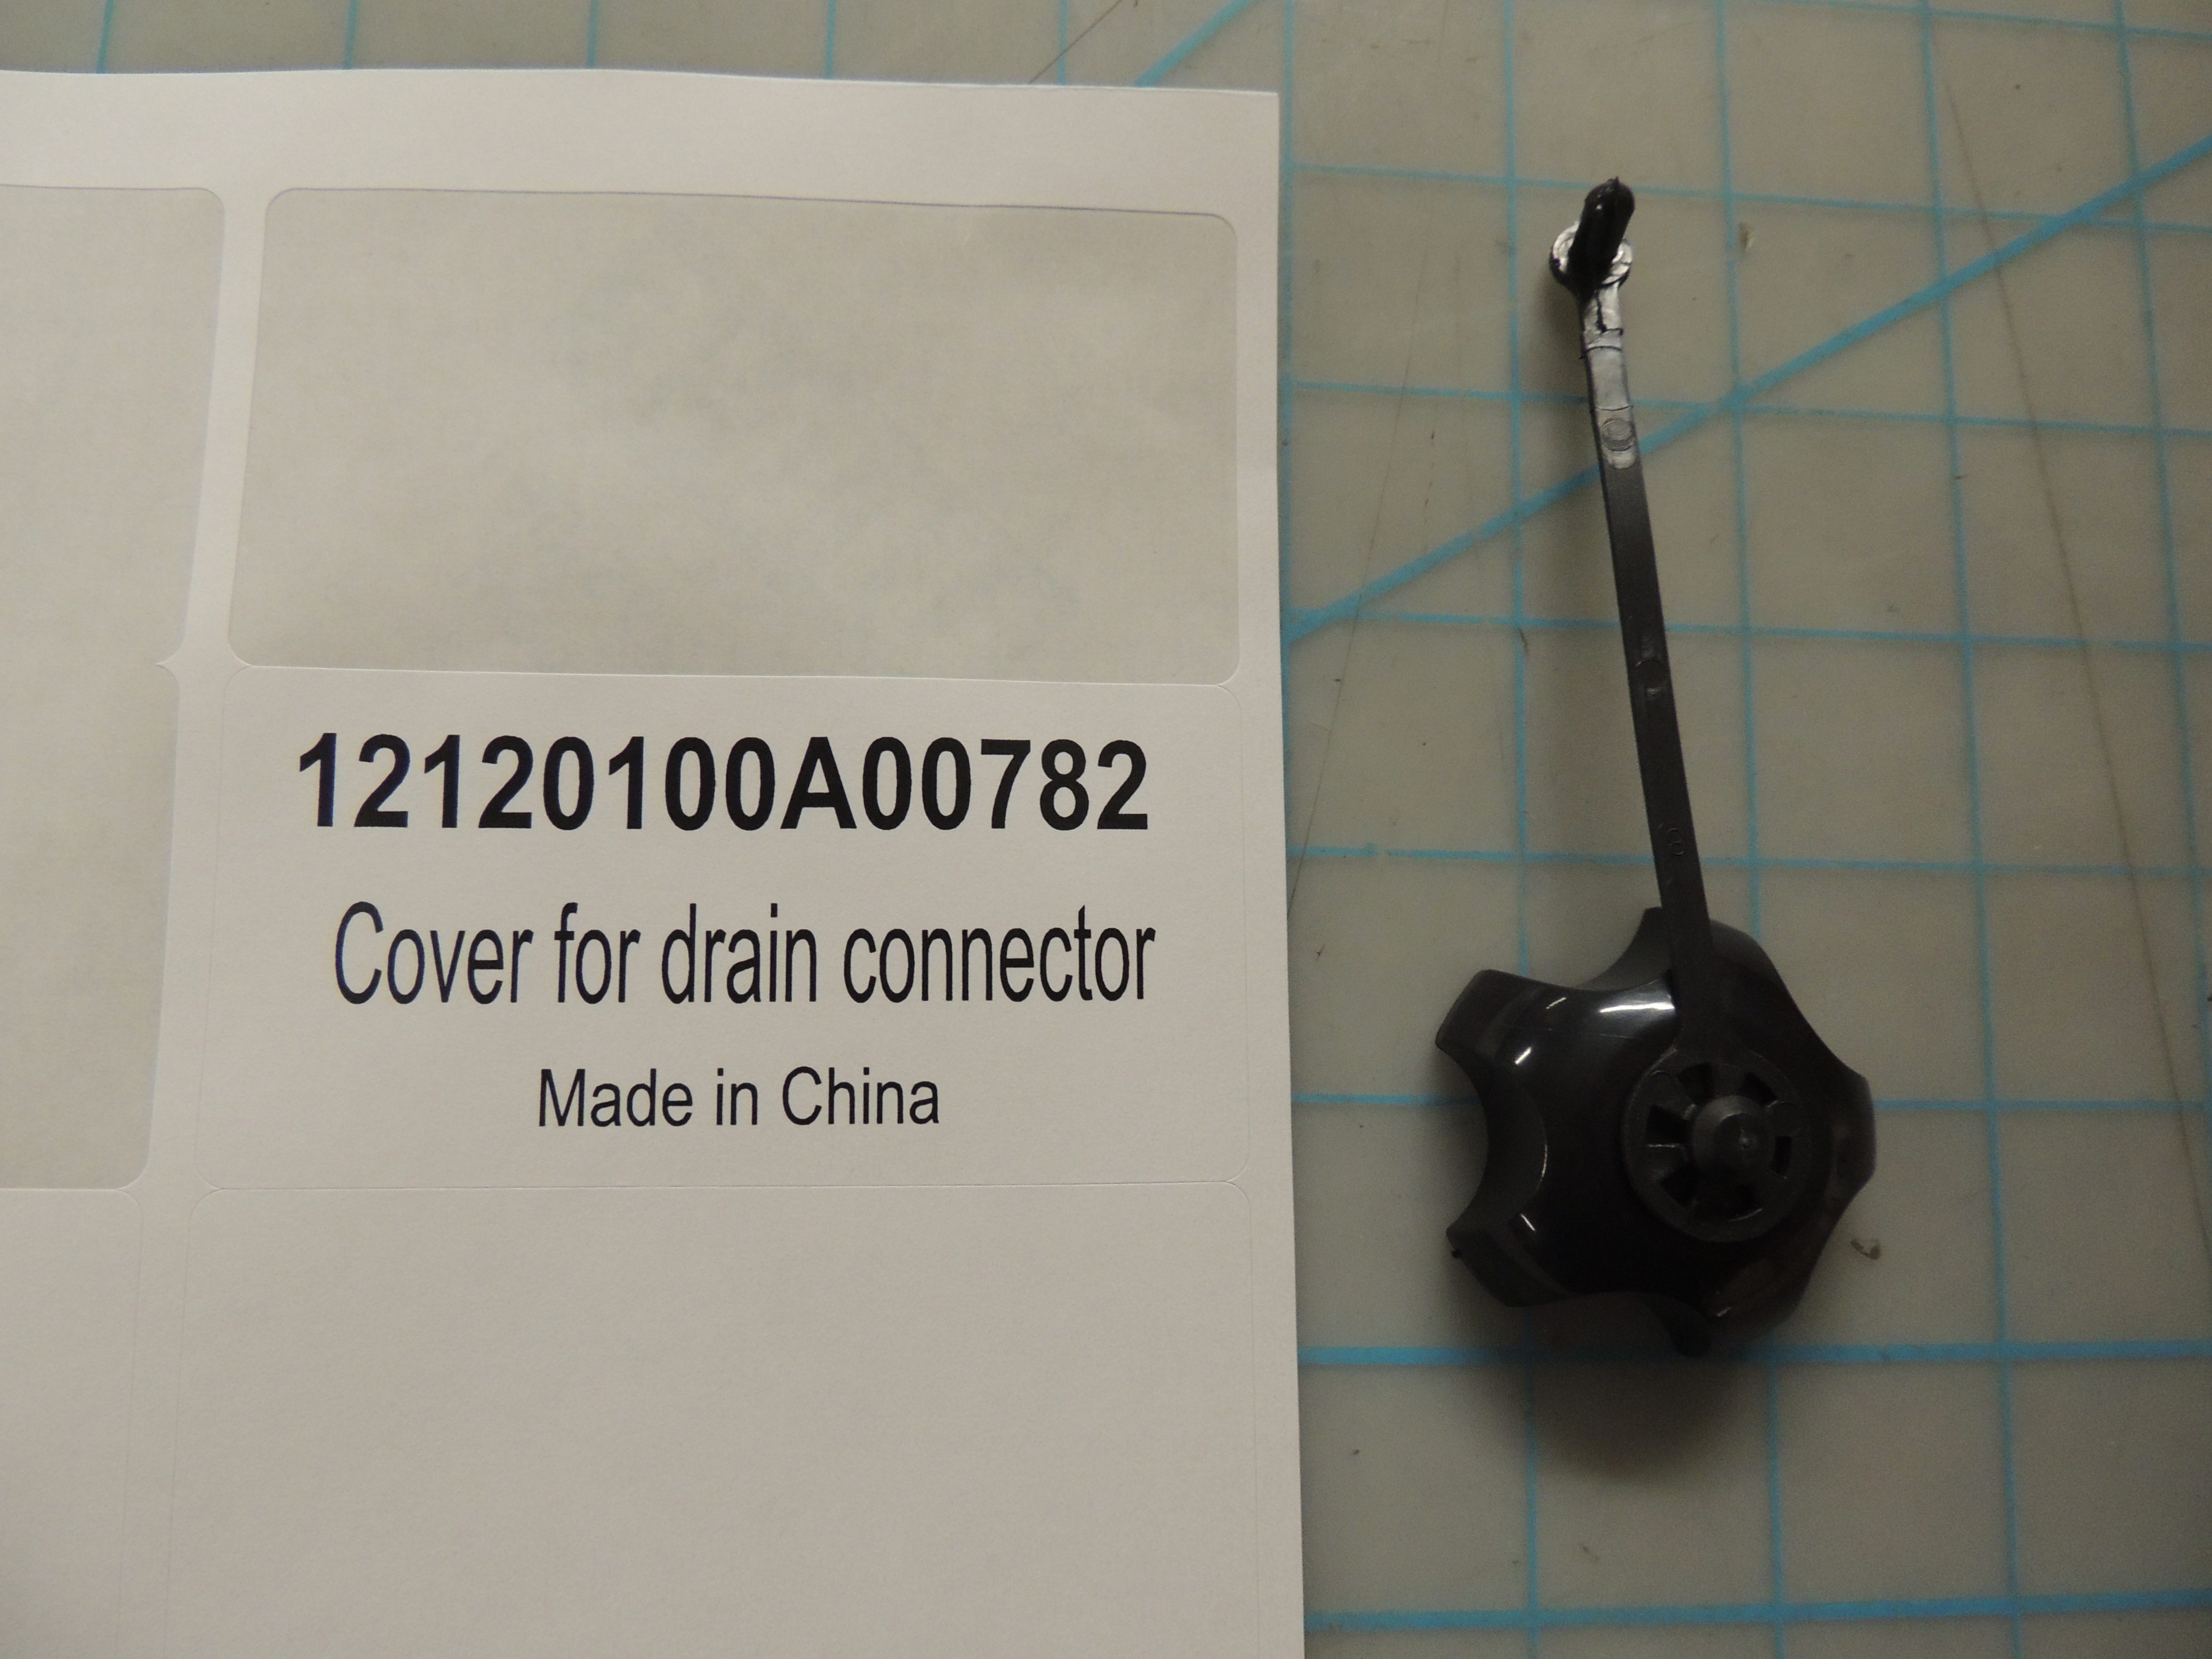 Cover for drain connector